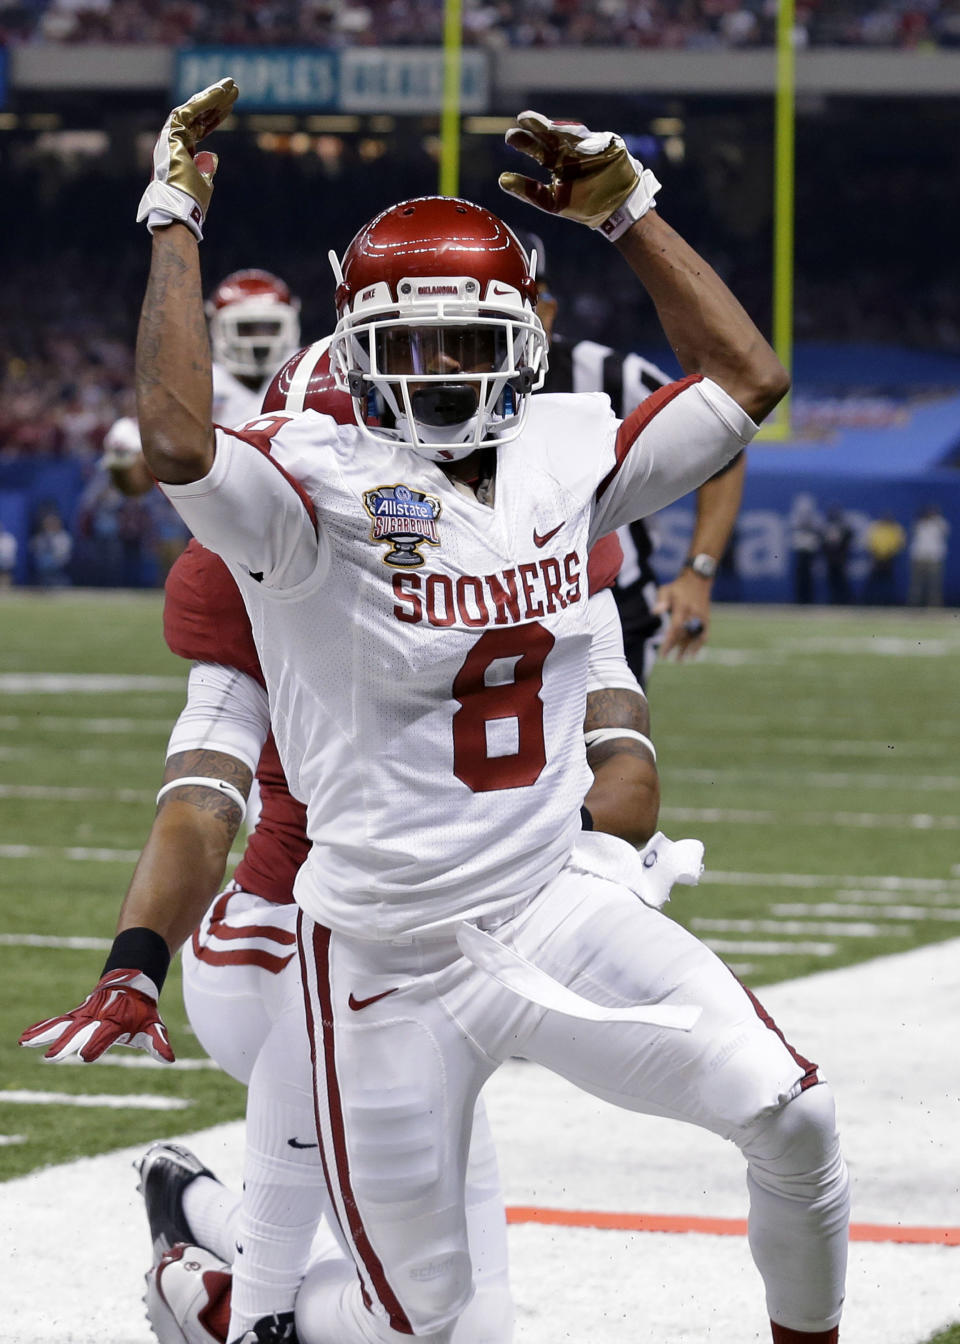 Oklahoma wide receiver Jalen Saunders (8) celebrates his touchdown reception during the first half of the Sugar Bowl NCAA college football game against Alabama, Thursday, Jan. 2, 2014, in New Orleans. (AP Photo/Rusty Costanza)